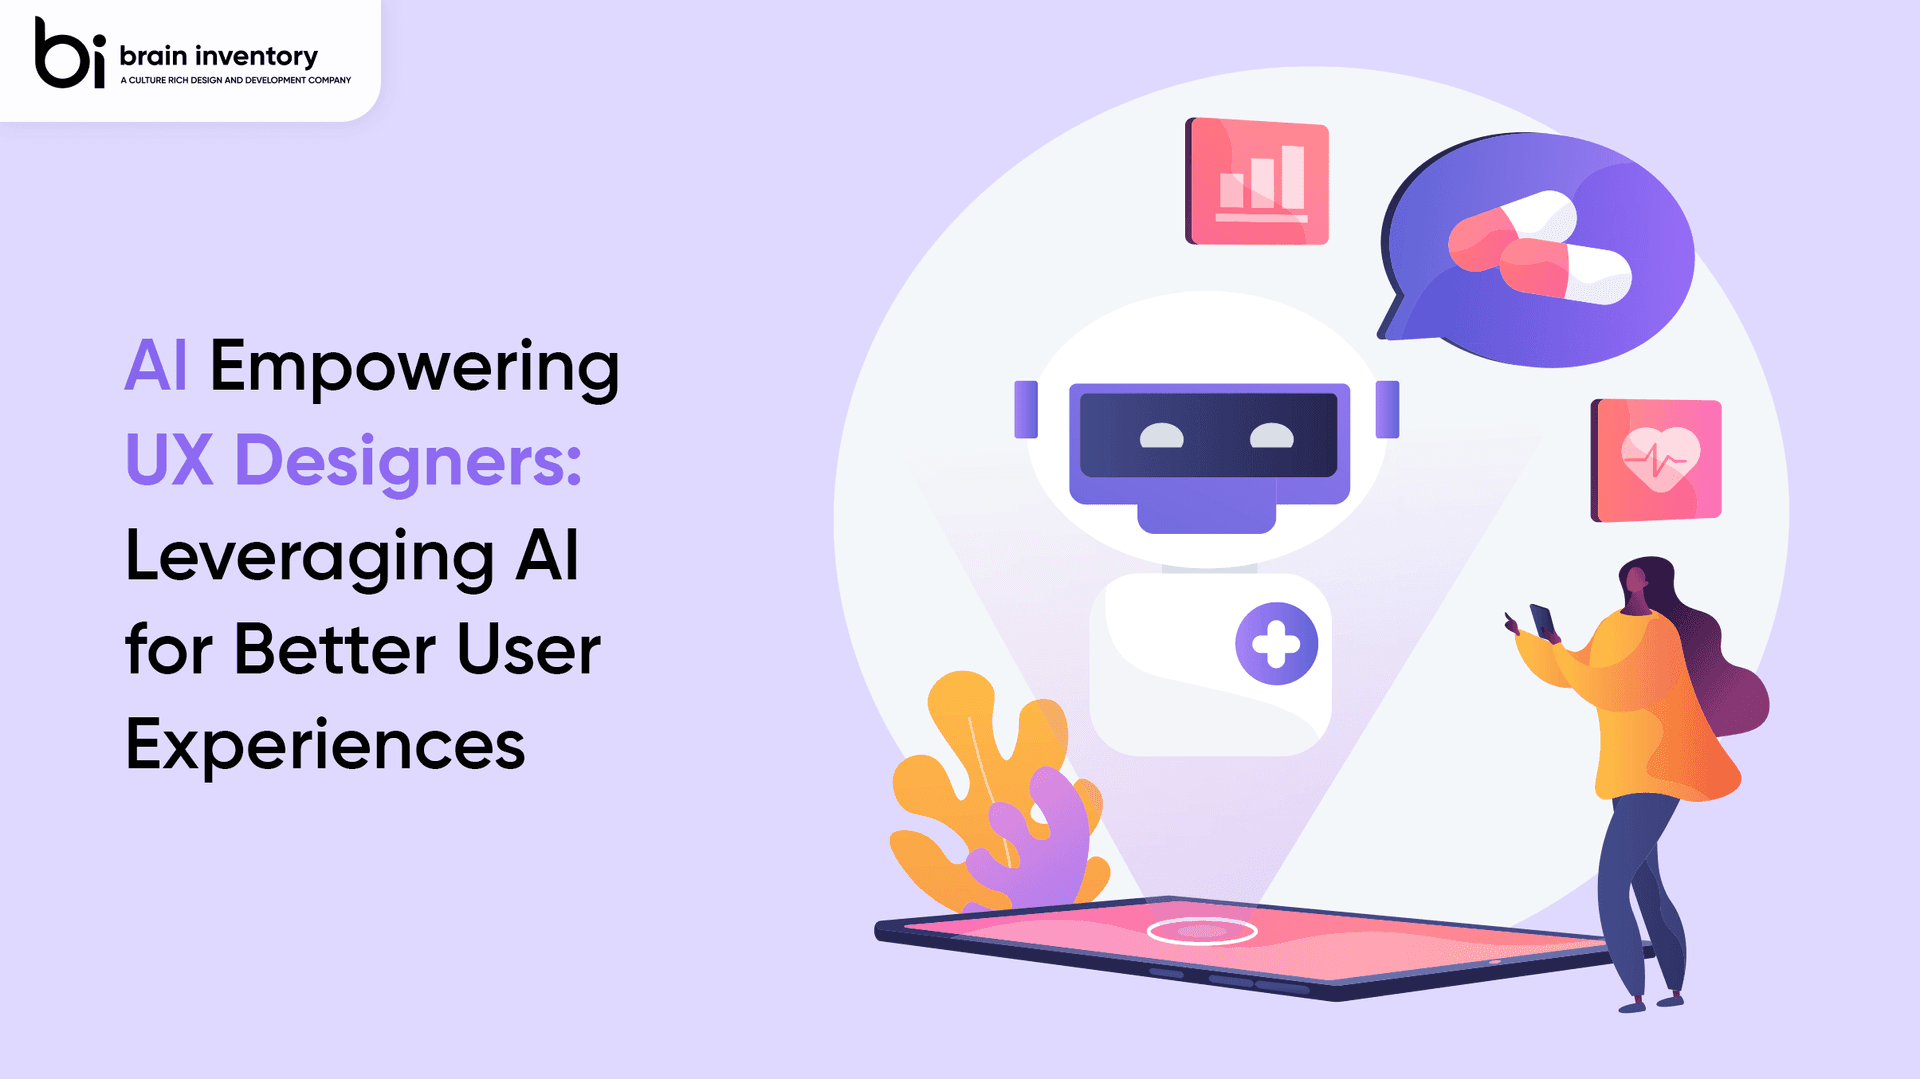 AI Empowering UX Designers: Leveraging AI for Better User Experiences